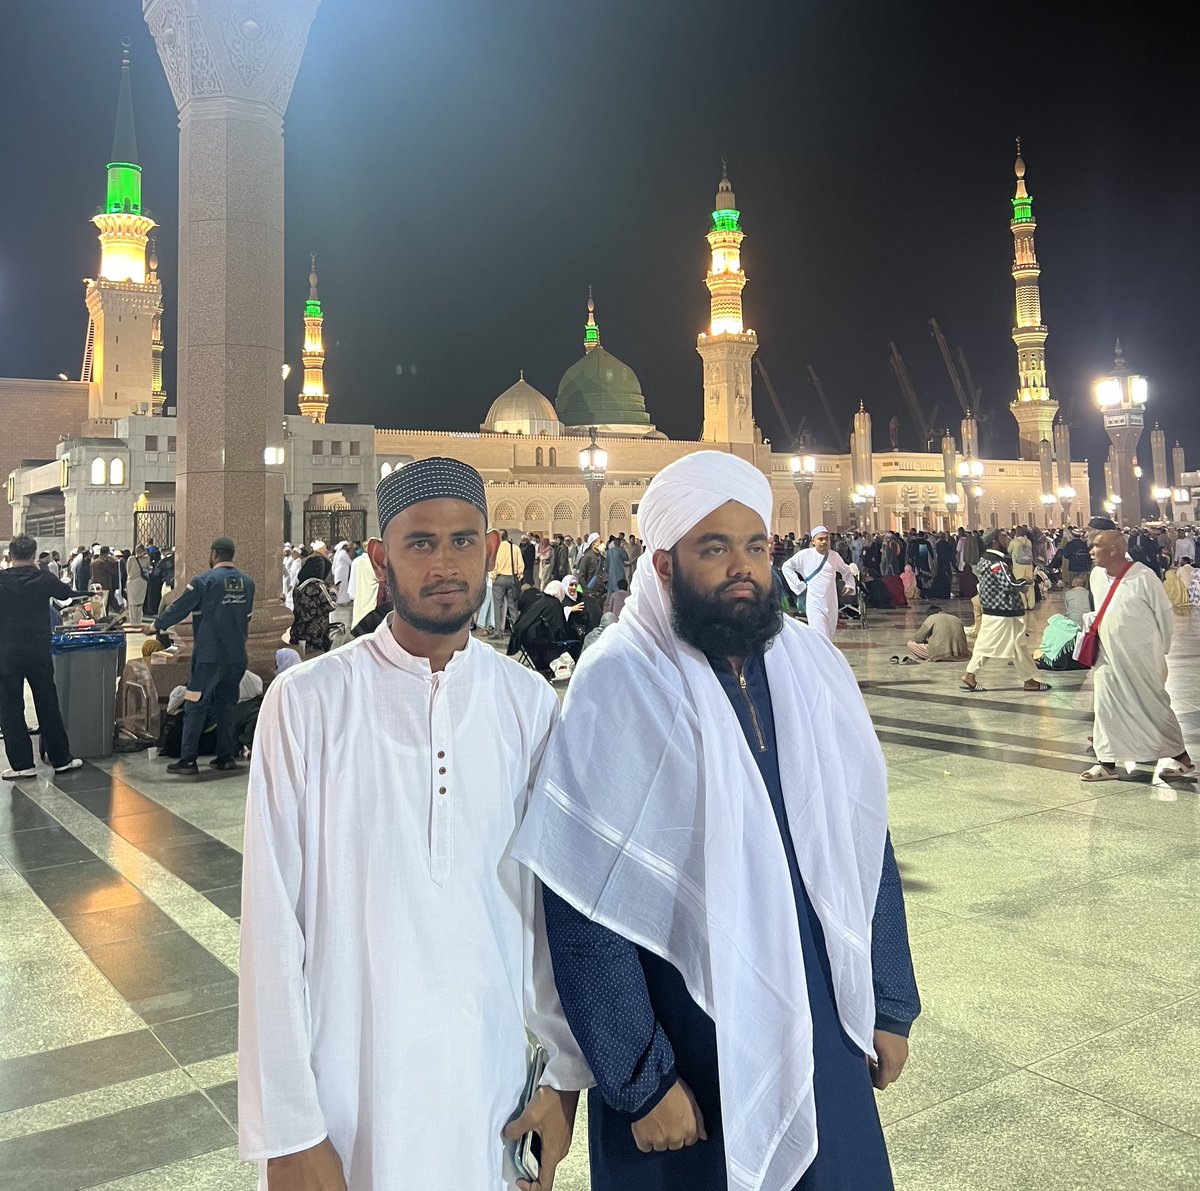 #Alhamdulillah, whatever I asked for,  Almighty Allah granted me everything through the means of the Holy Prophet ﷺ #madinah #masjidenabawi #sayyedaminulqadri